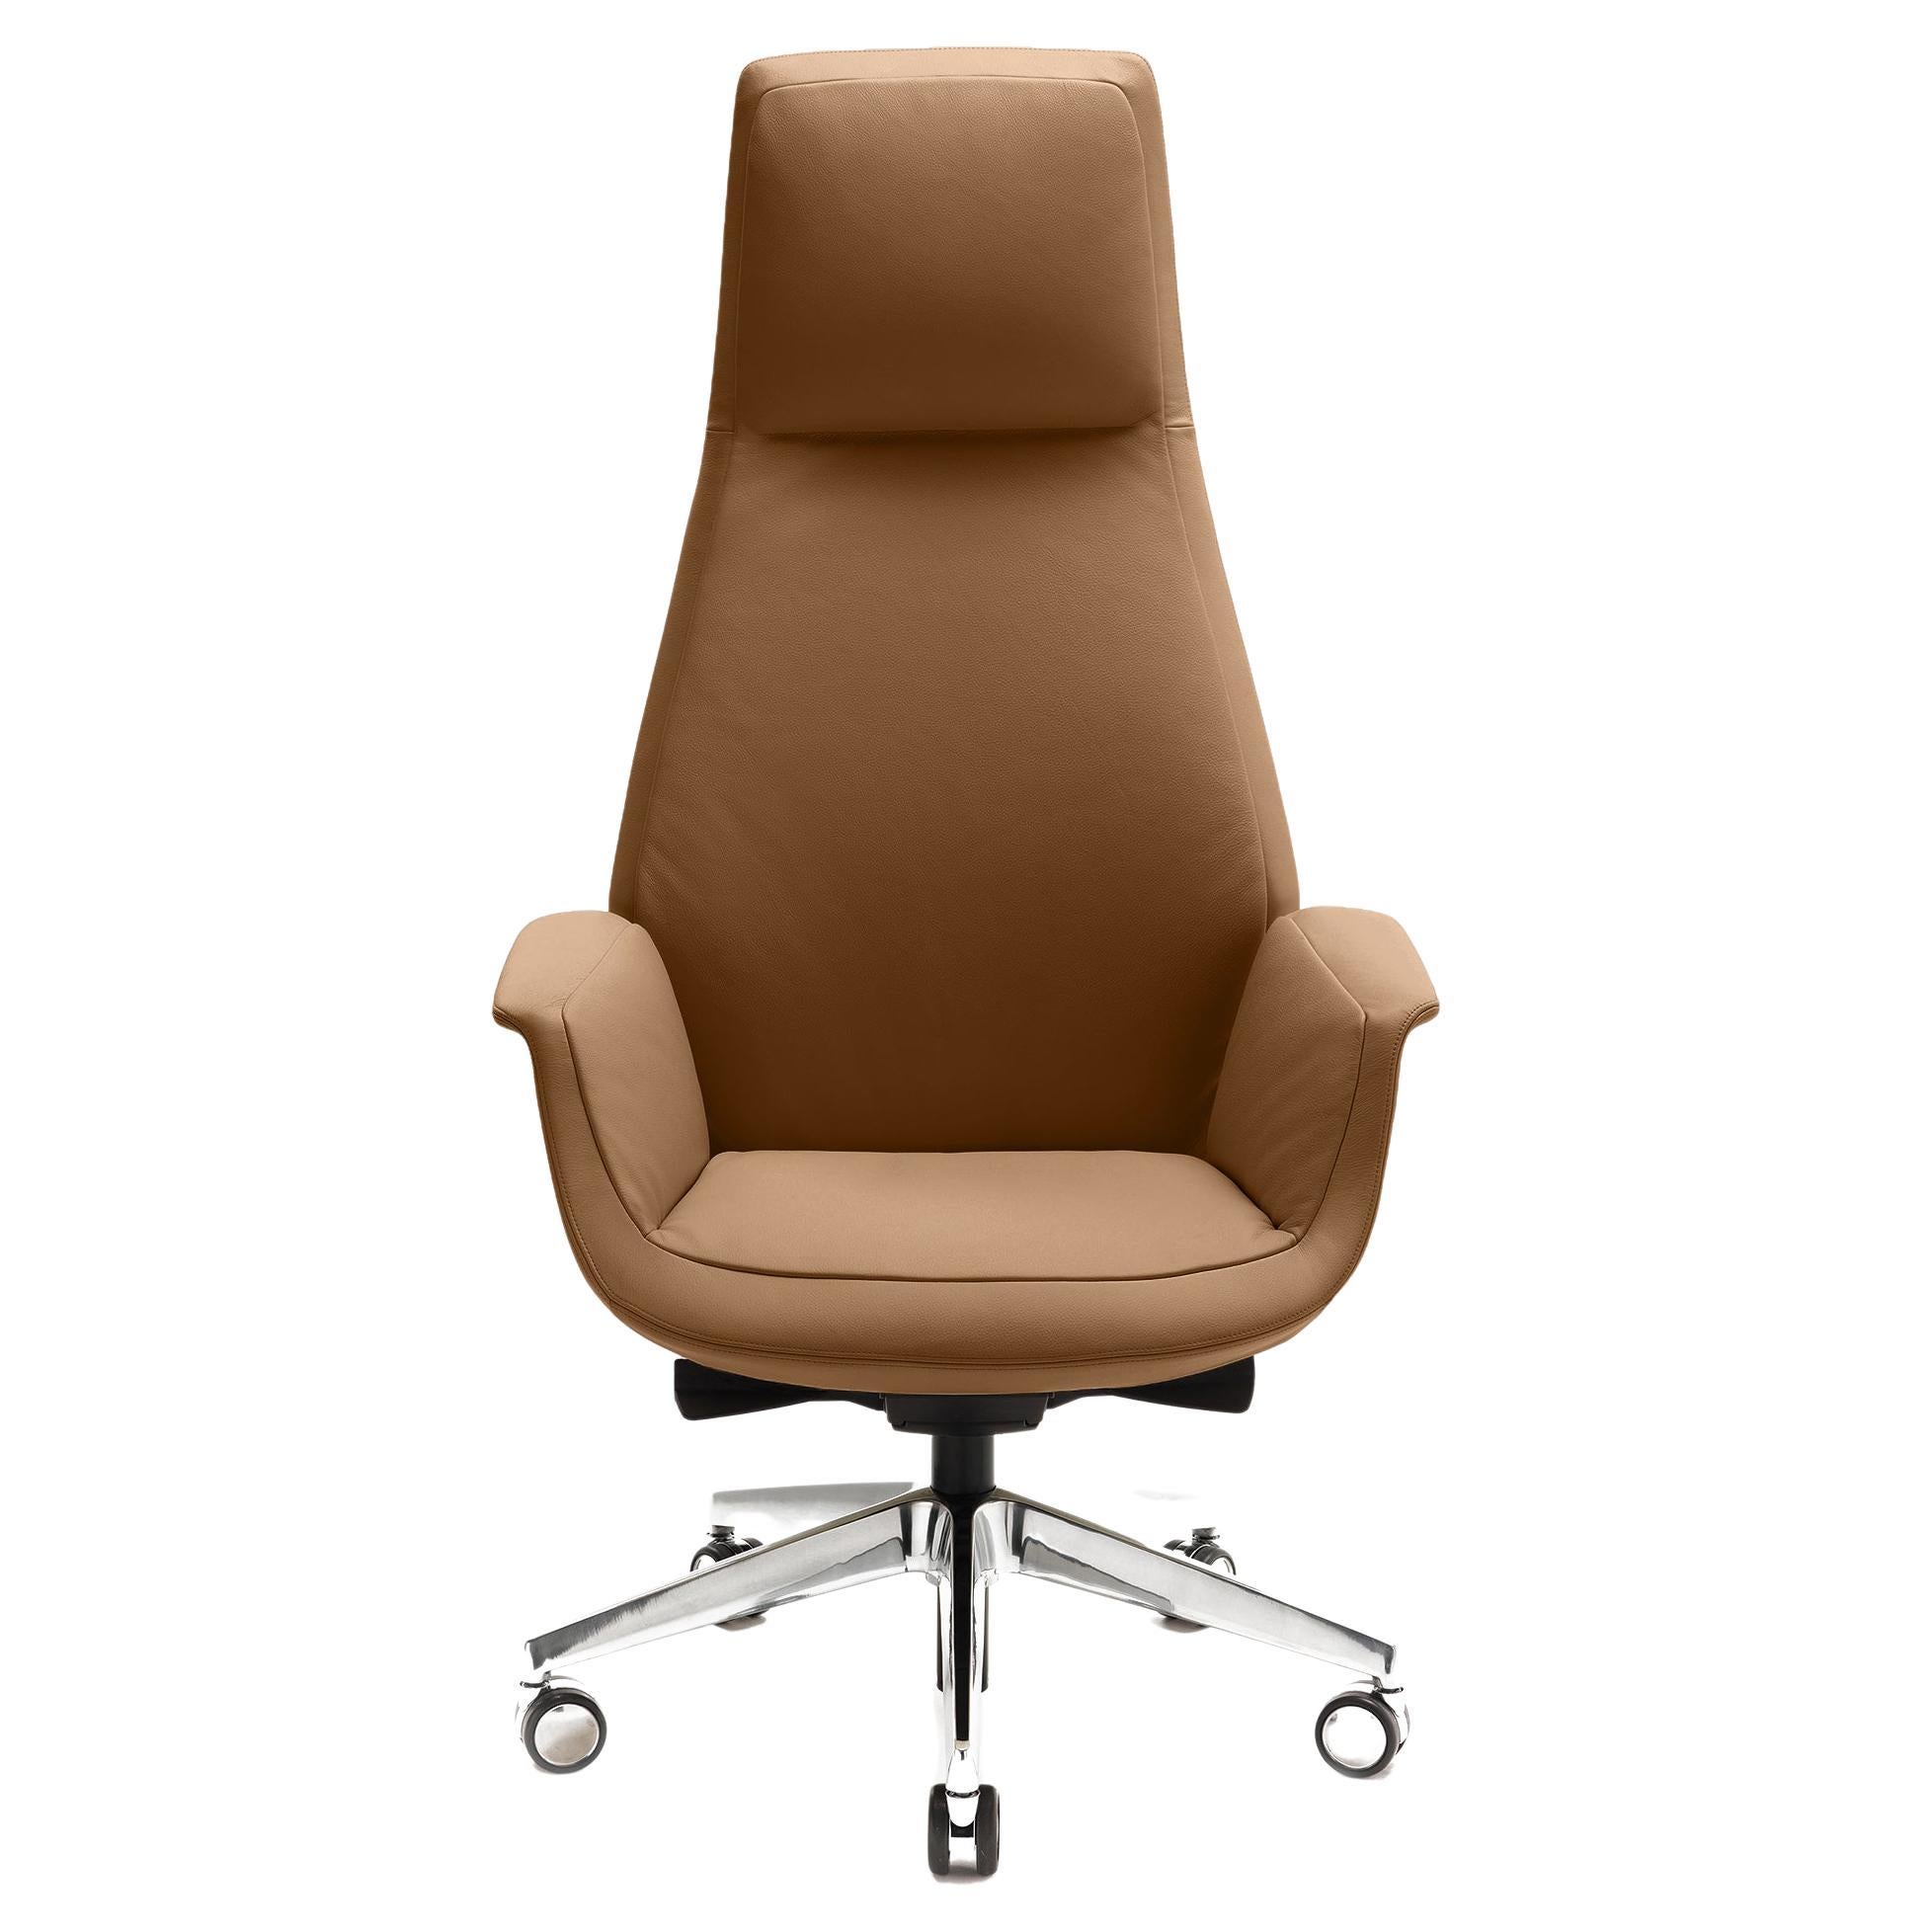 Downtown President Office Chair Genuine Leather Pelle SC 56 Siena Brown For Sale